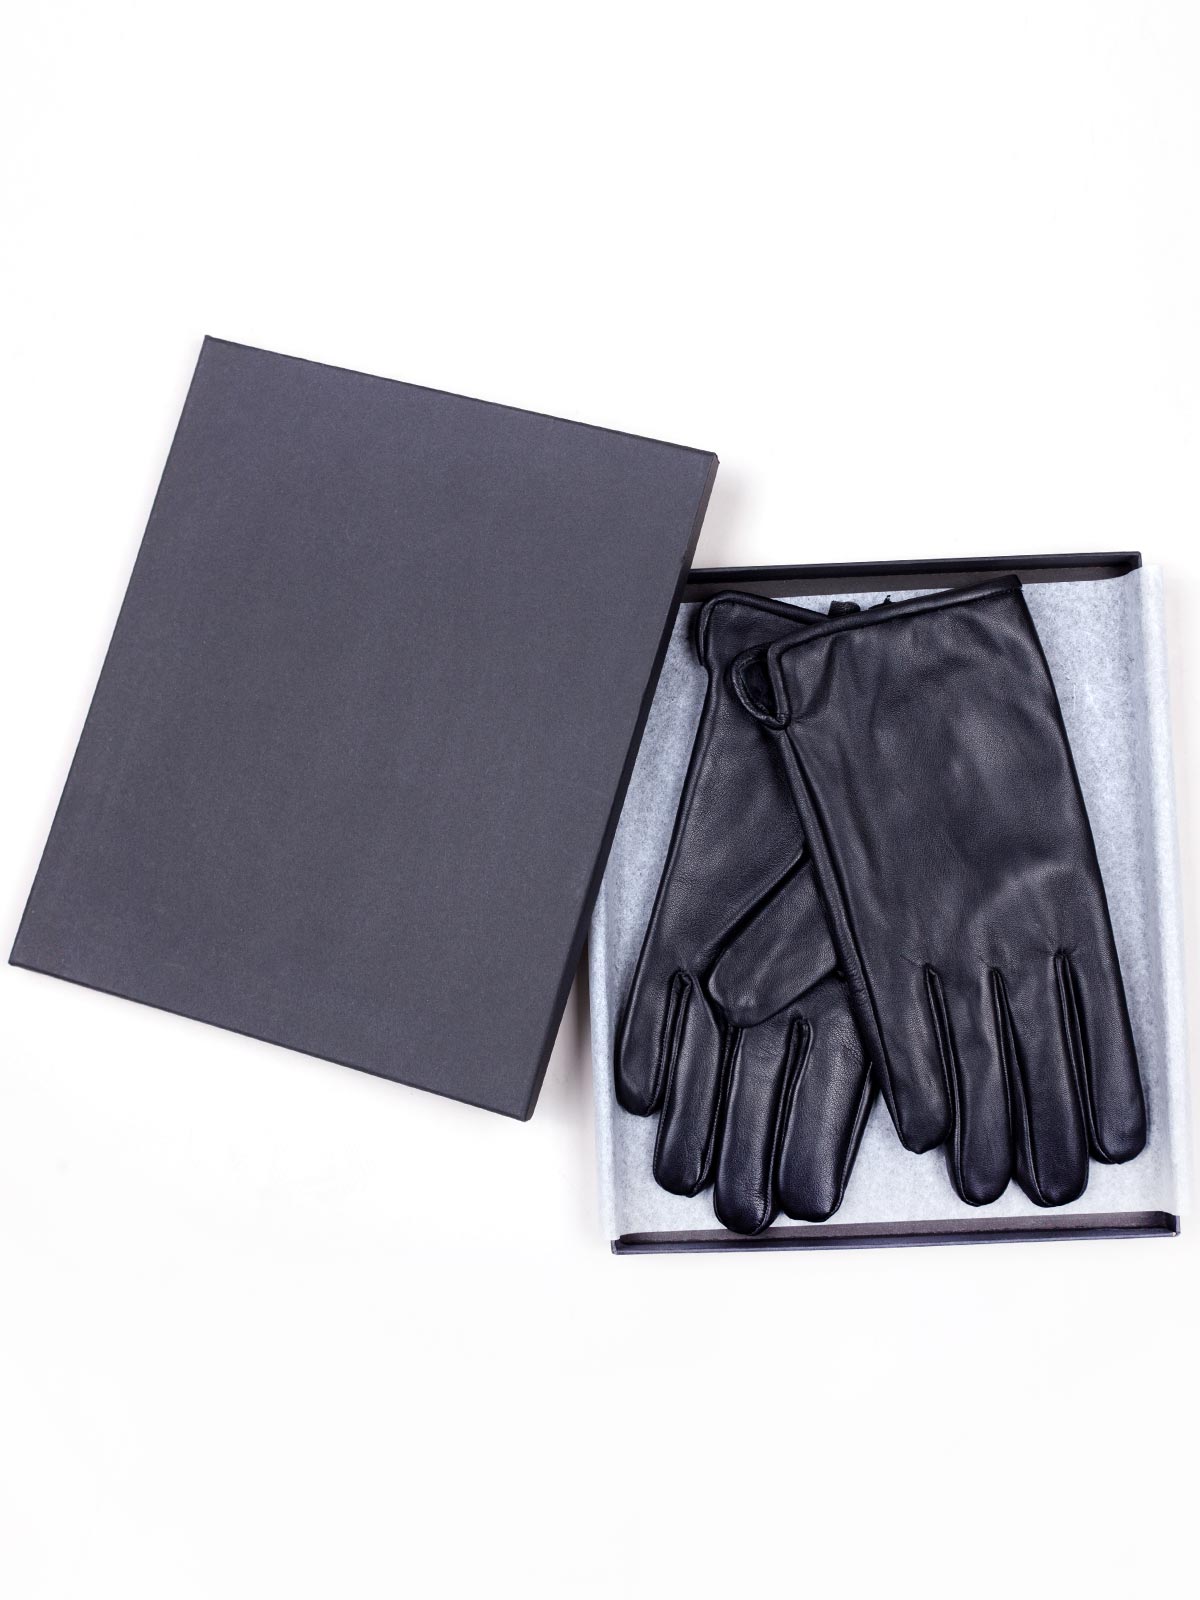  black pure leather gloves  - 10571 - € 31.50 img3